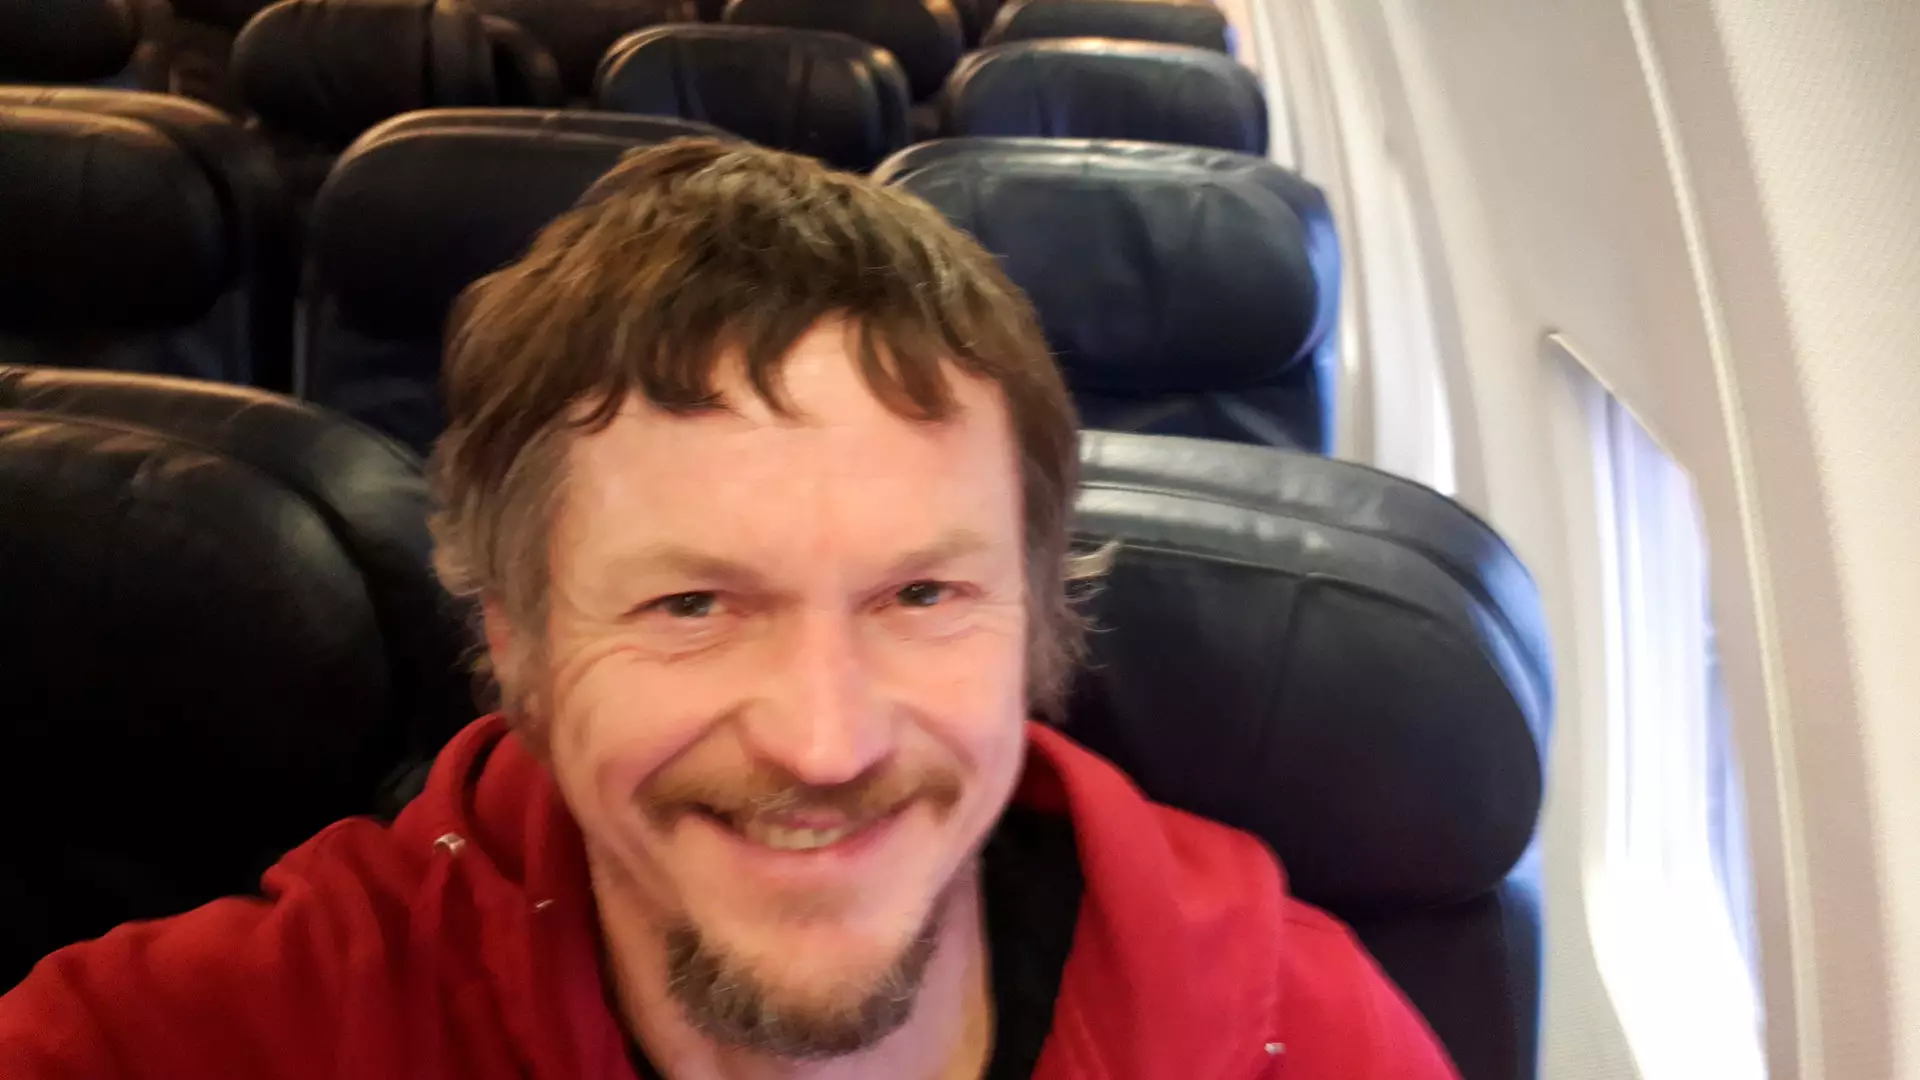 A Lithuanian Man Was The Only Passenger On Flight To Italy 